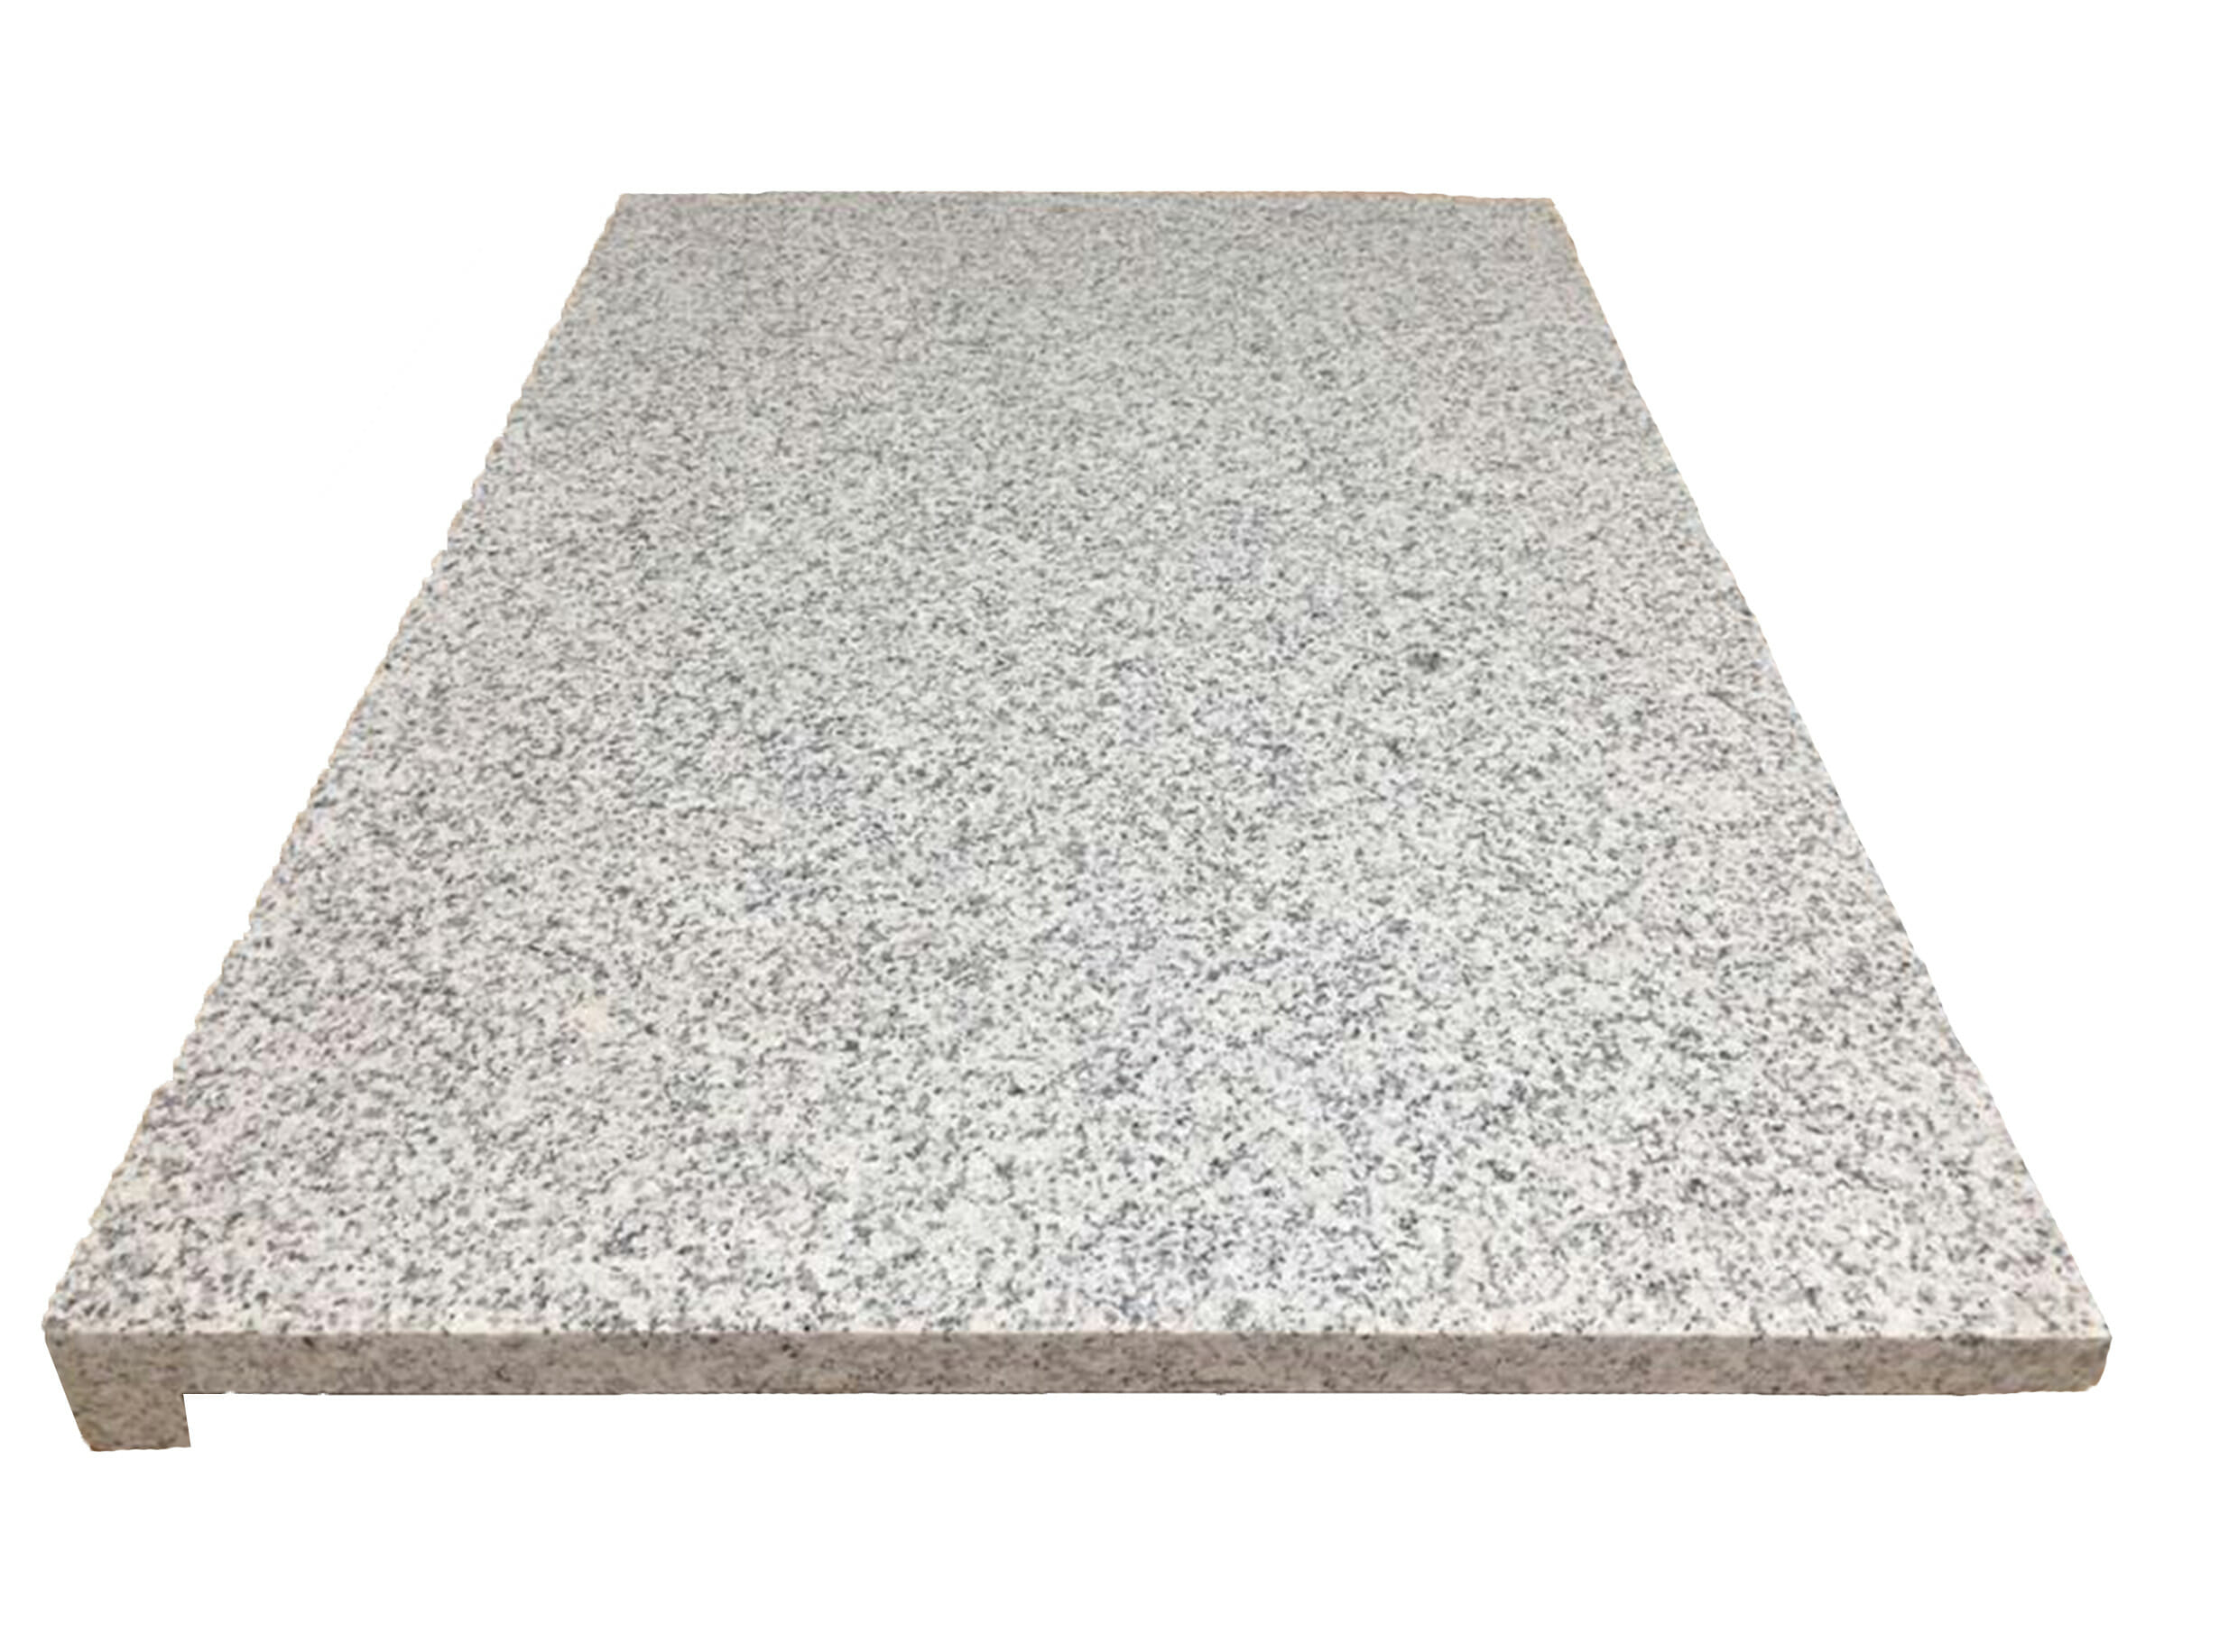 dove-40mm-rebate-granite-pavers-supplier-selling-at-wholesale-prices